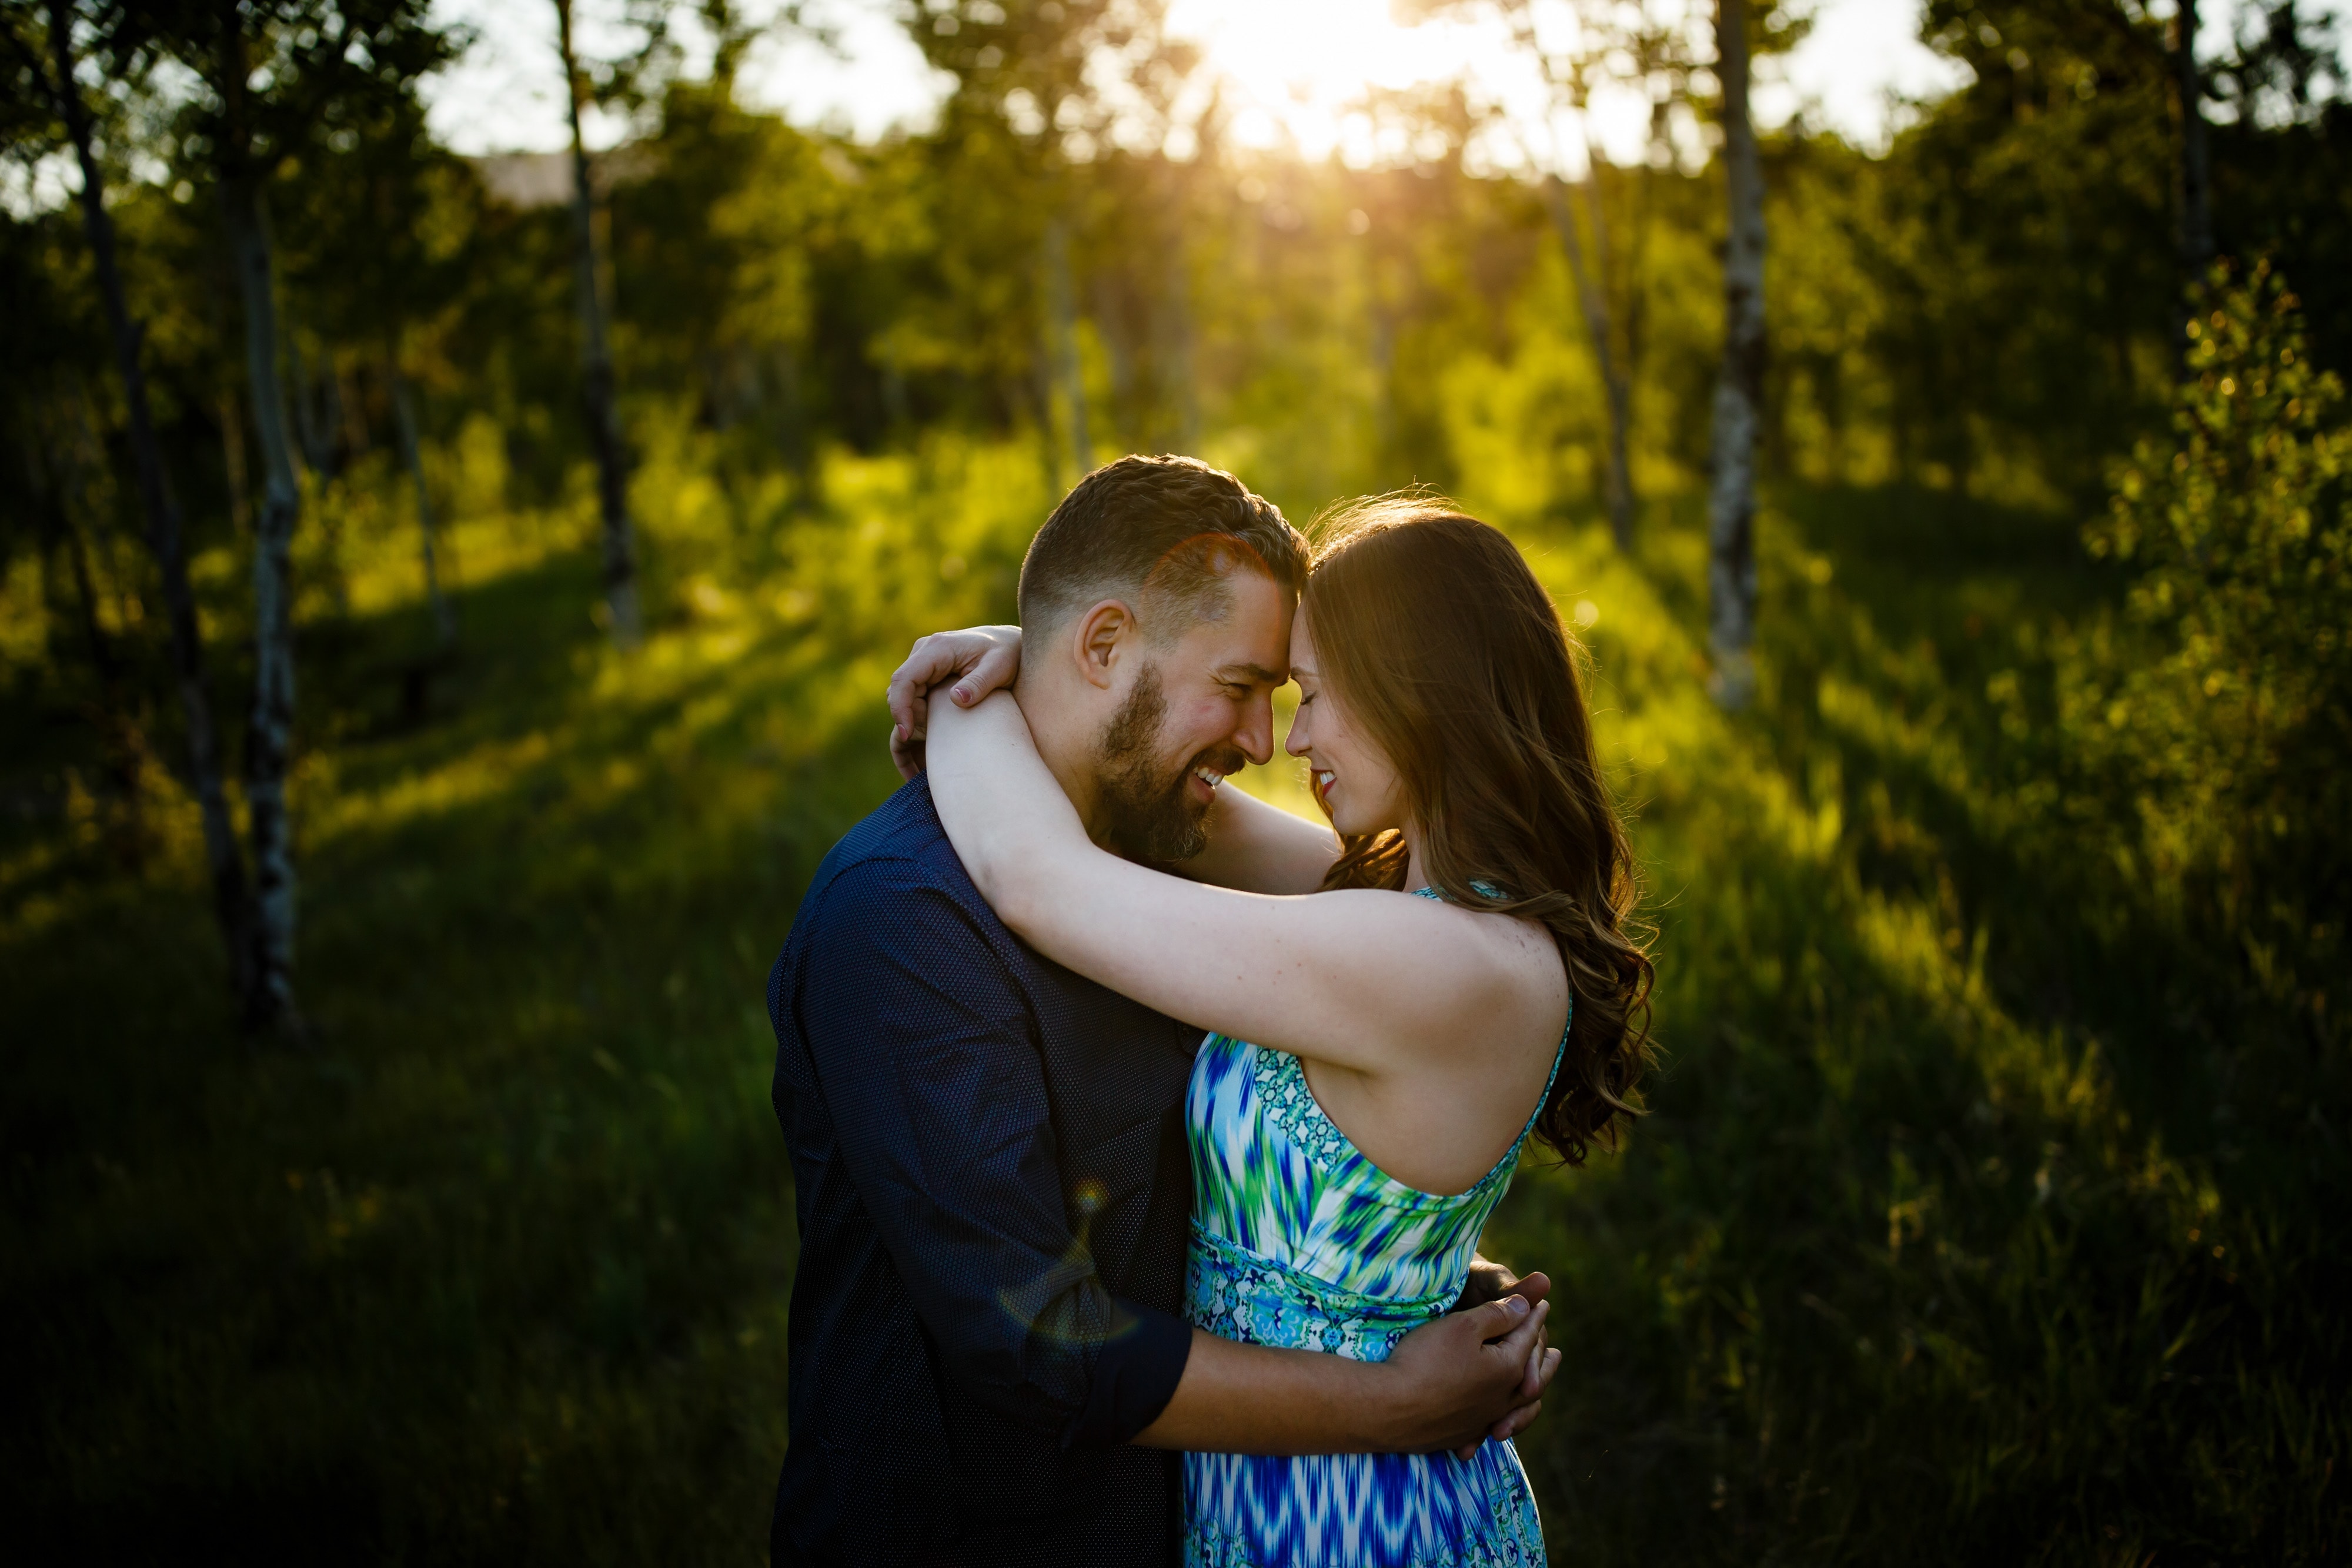 Nick embraces Sharon near the Mule Deer Trail during their colorful engagement in Golden Gate Canyon State Park